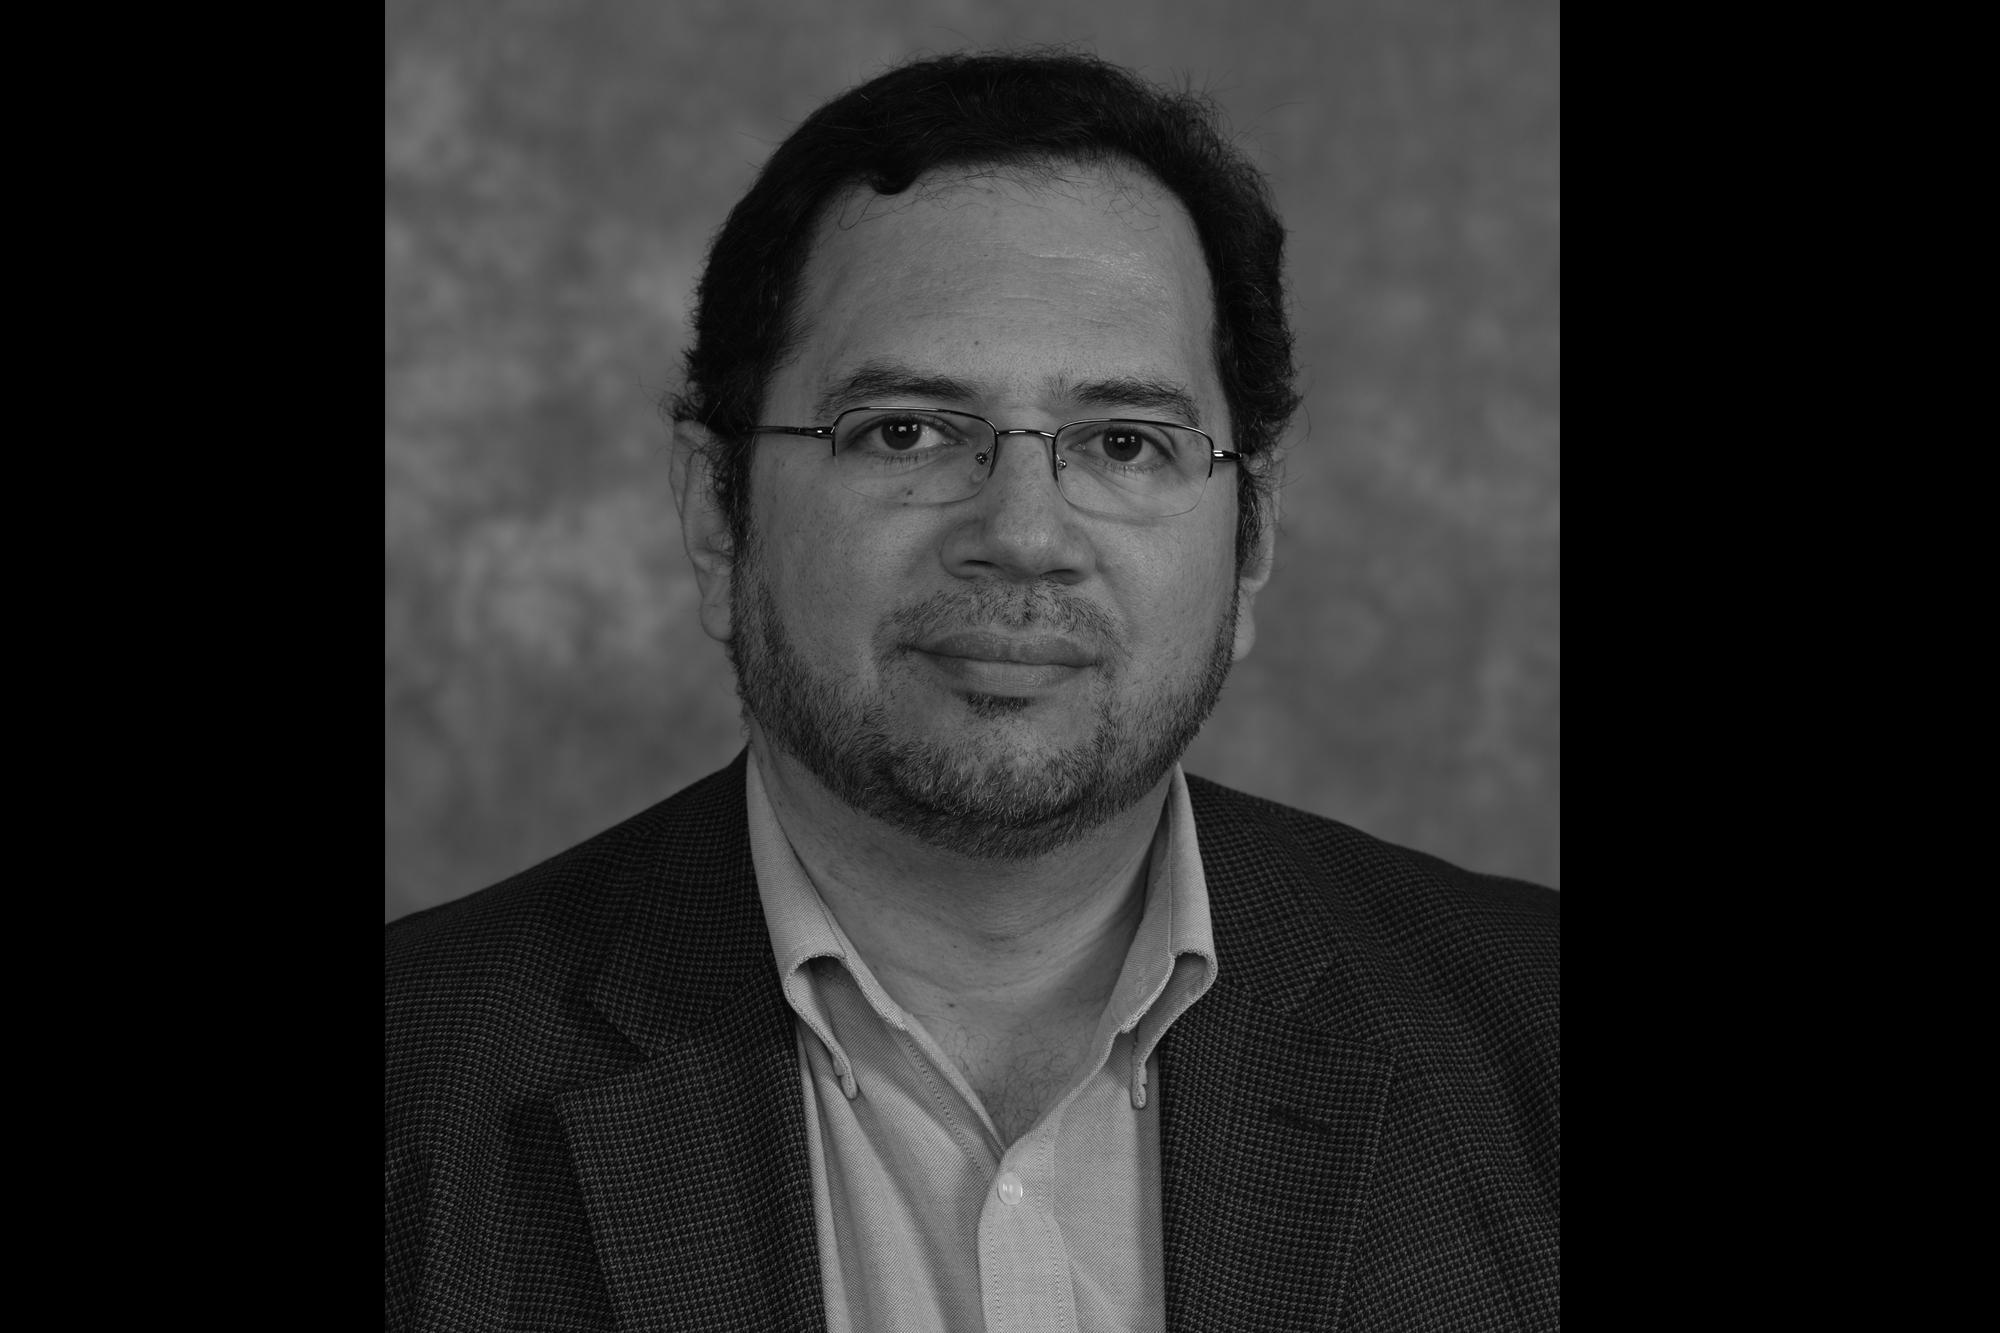 José Miguel Cruz, Ph.D., is director of research at the Kimberly Green Latin American and Caribbean Center at Florida International University. From 1993 to 2006, he was the director of the Public Opinion Institute at the Central American University (UCA) in El Salvador. 